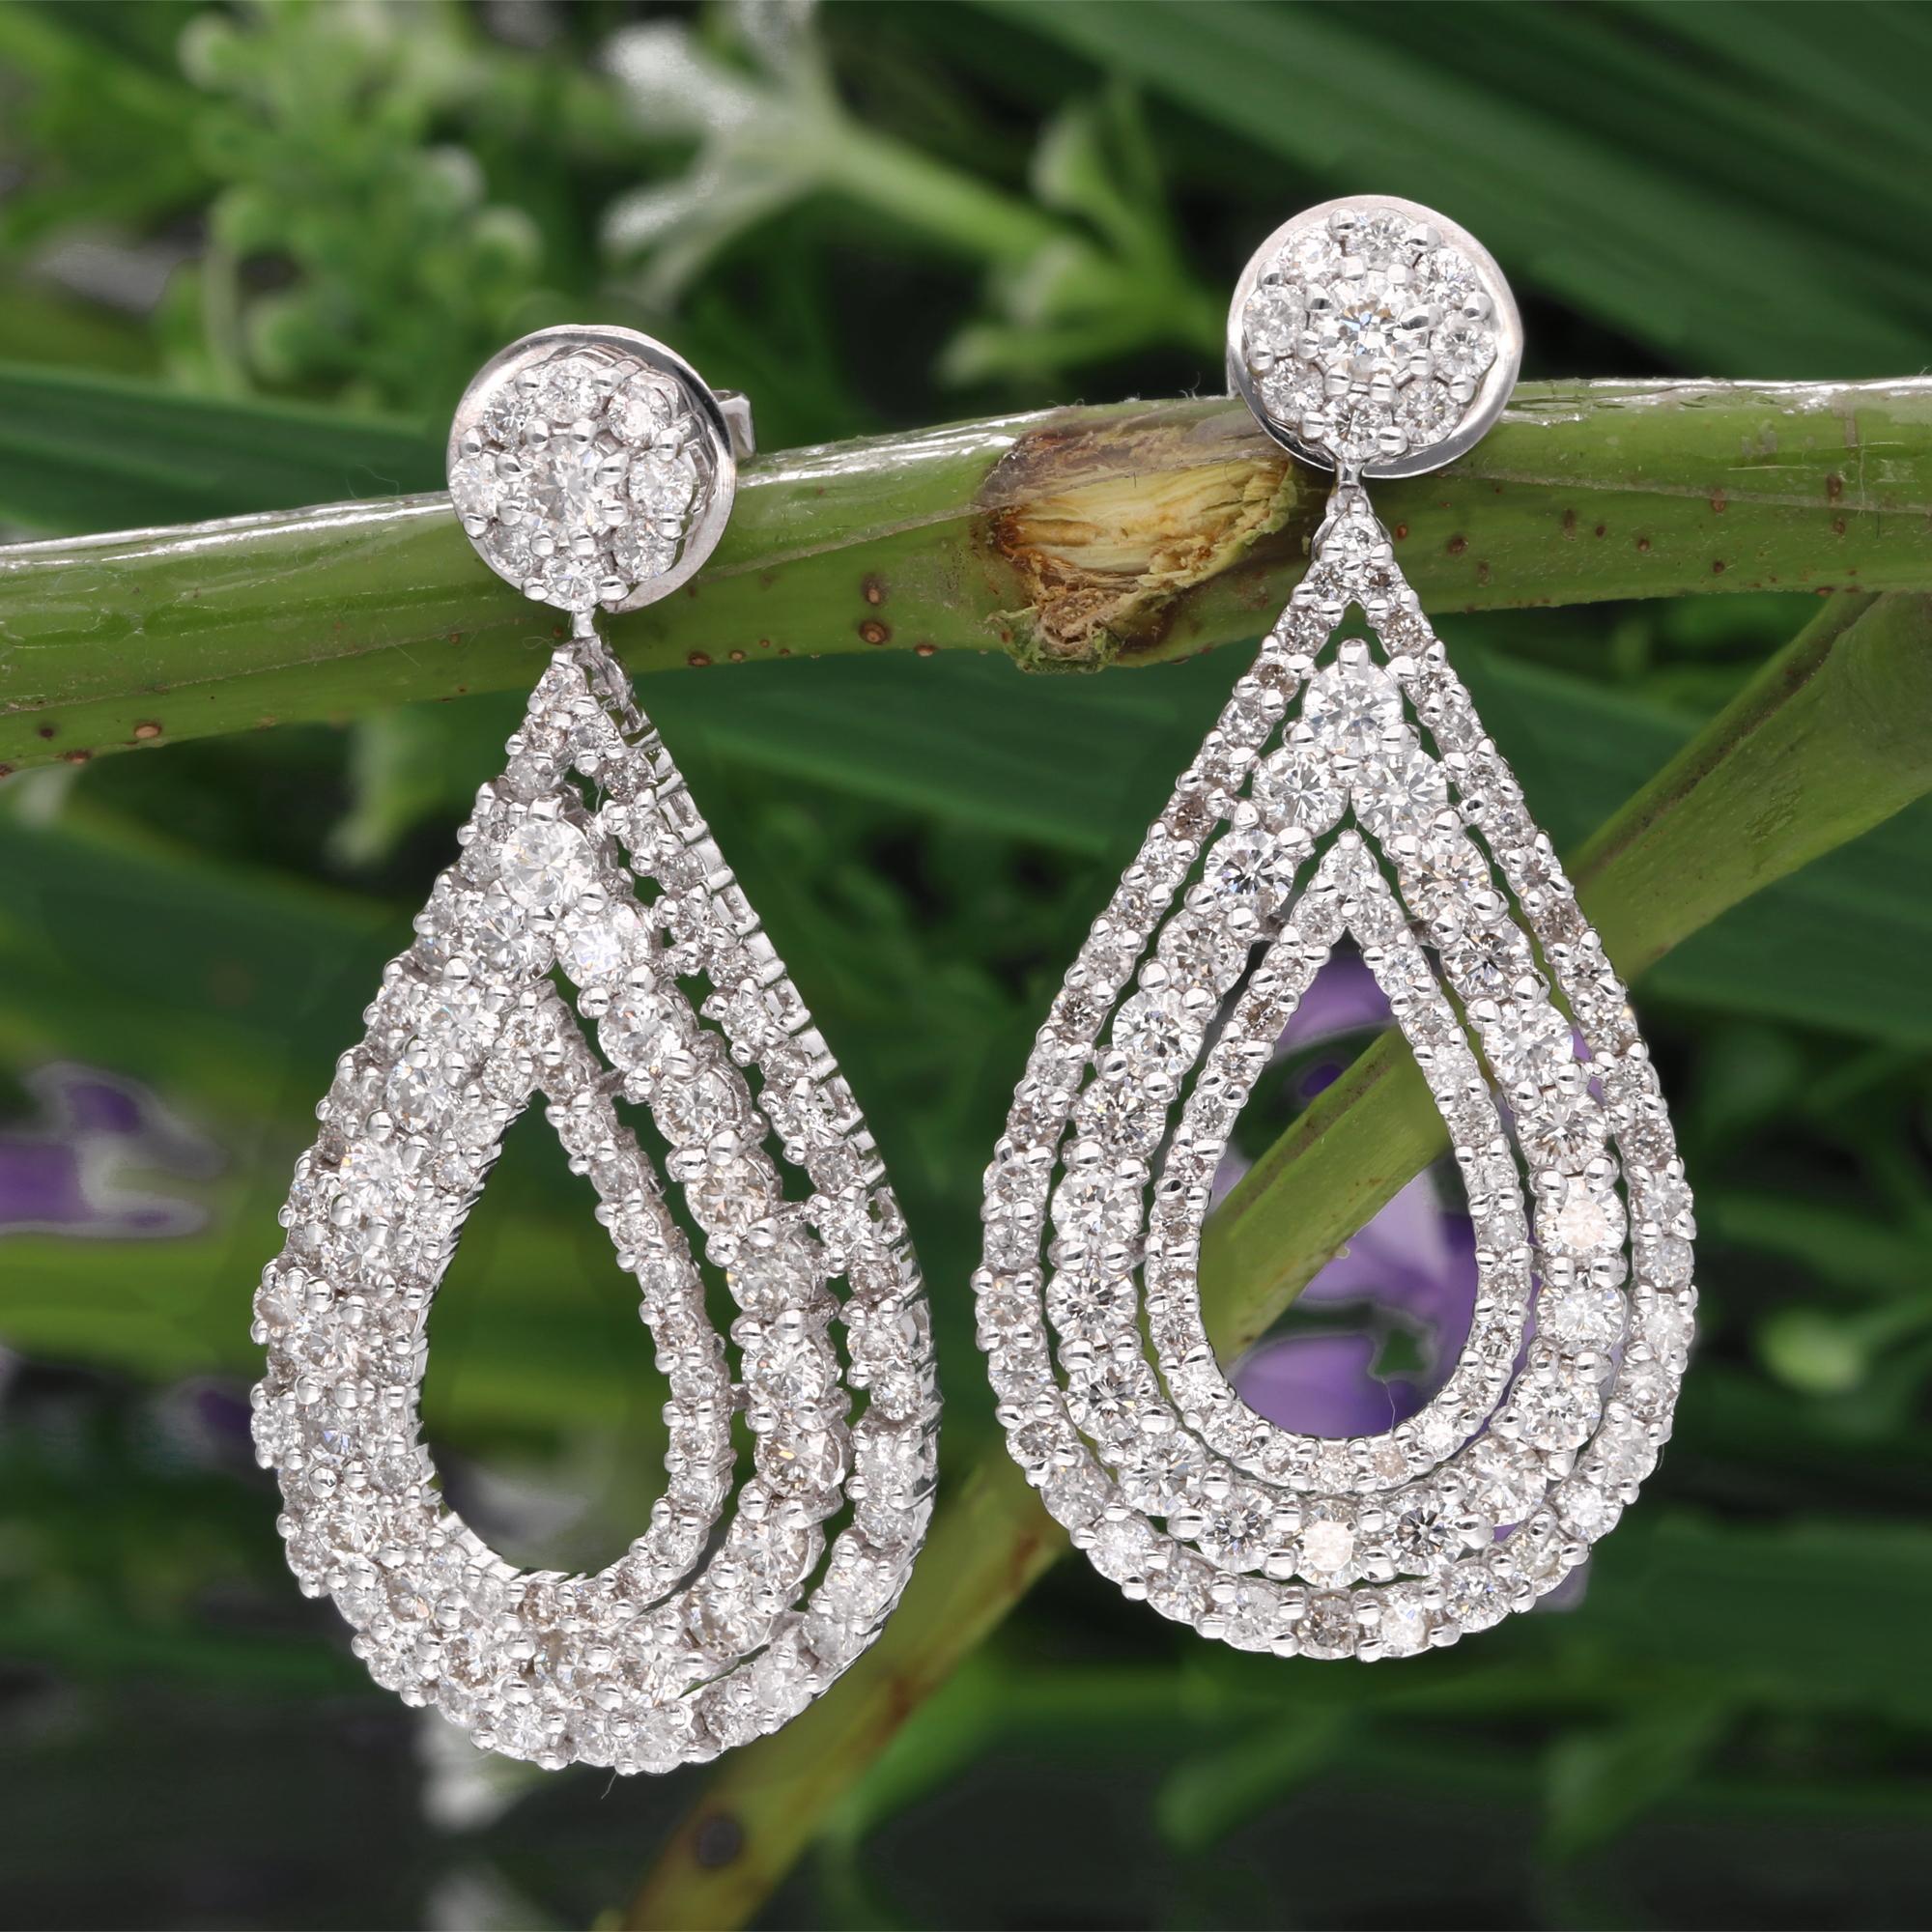 Item Code :- SFE-1239
Gross Wt. :- 8.72 gm
14k White Gold Wt. :- 8.05 gm
Natural Diamond Wt. :- 3.35 Ct. ( AVERAGE DIAMOND CLARITY SI1-SI2 & COLOR H-I )
Earrings Length :- 35 mm approx.

✦ Sizing
.....................
We can adjust most items to fit